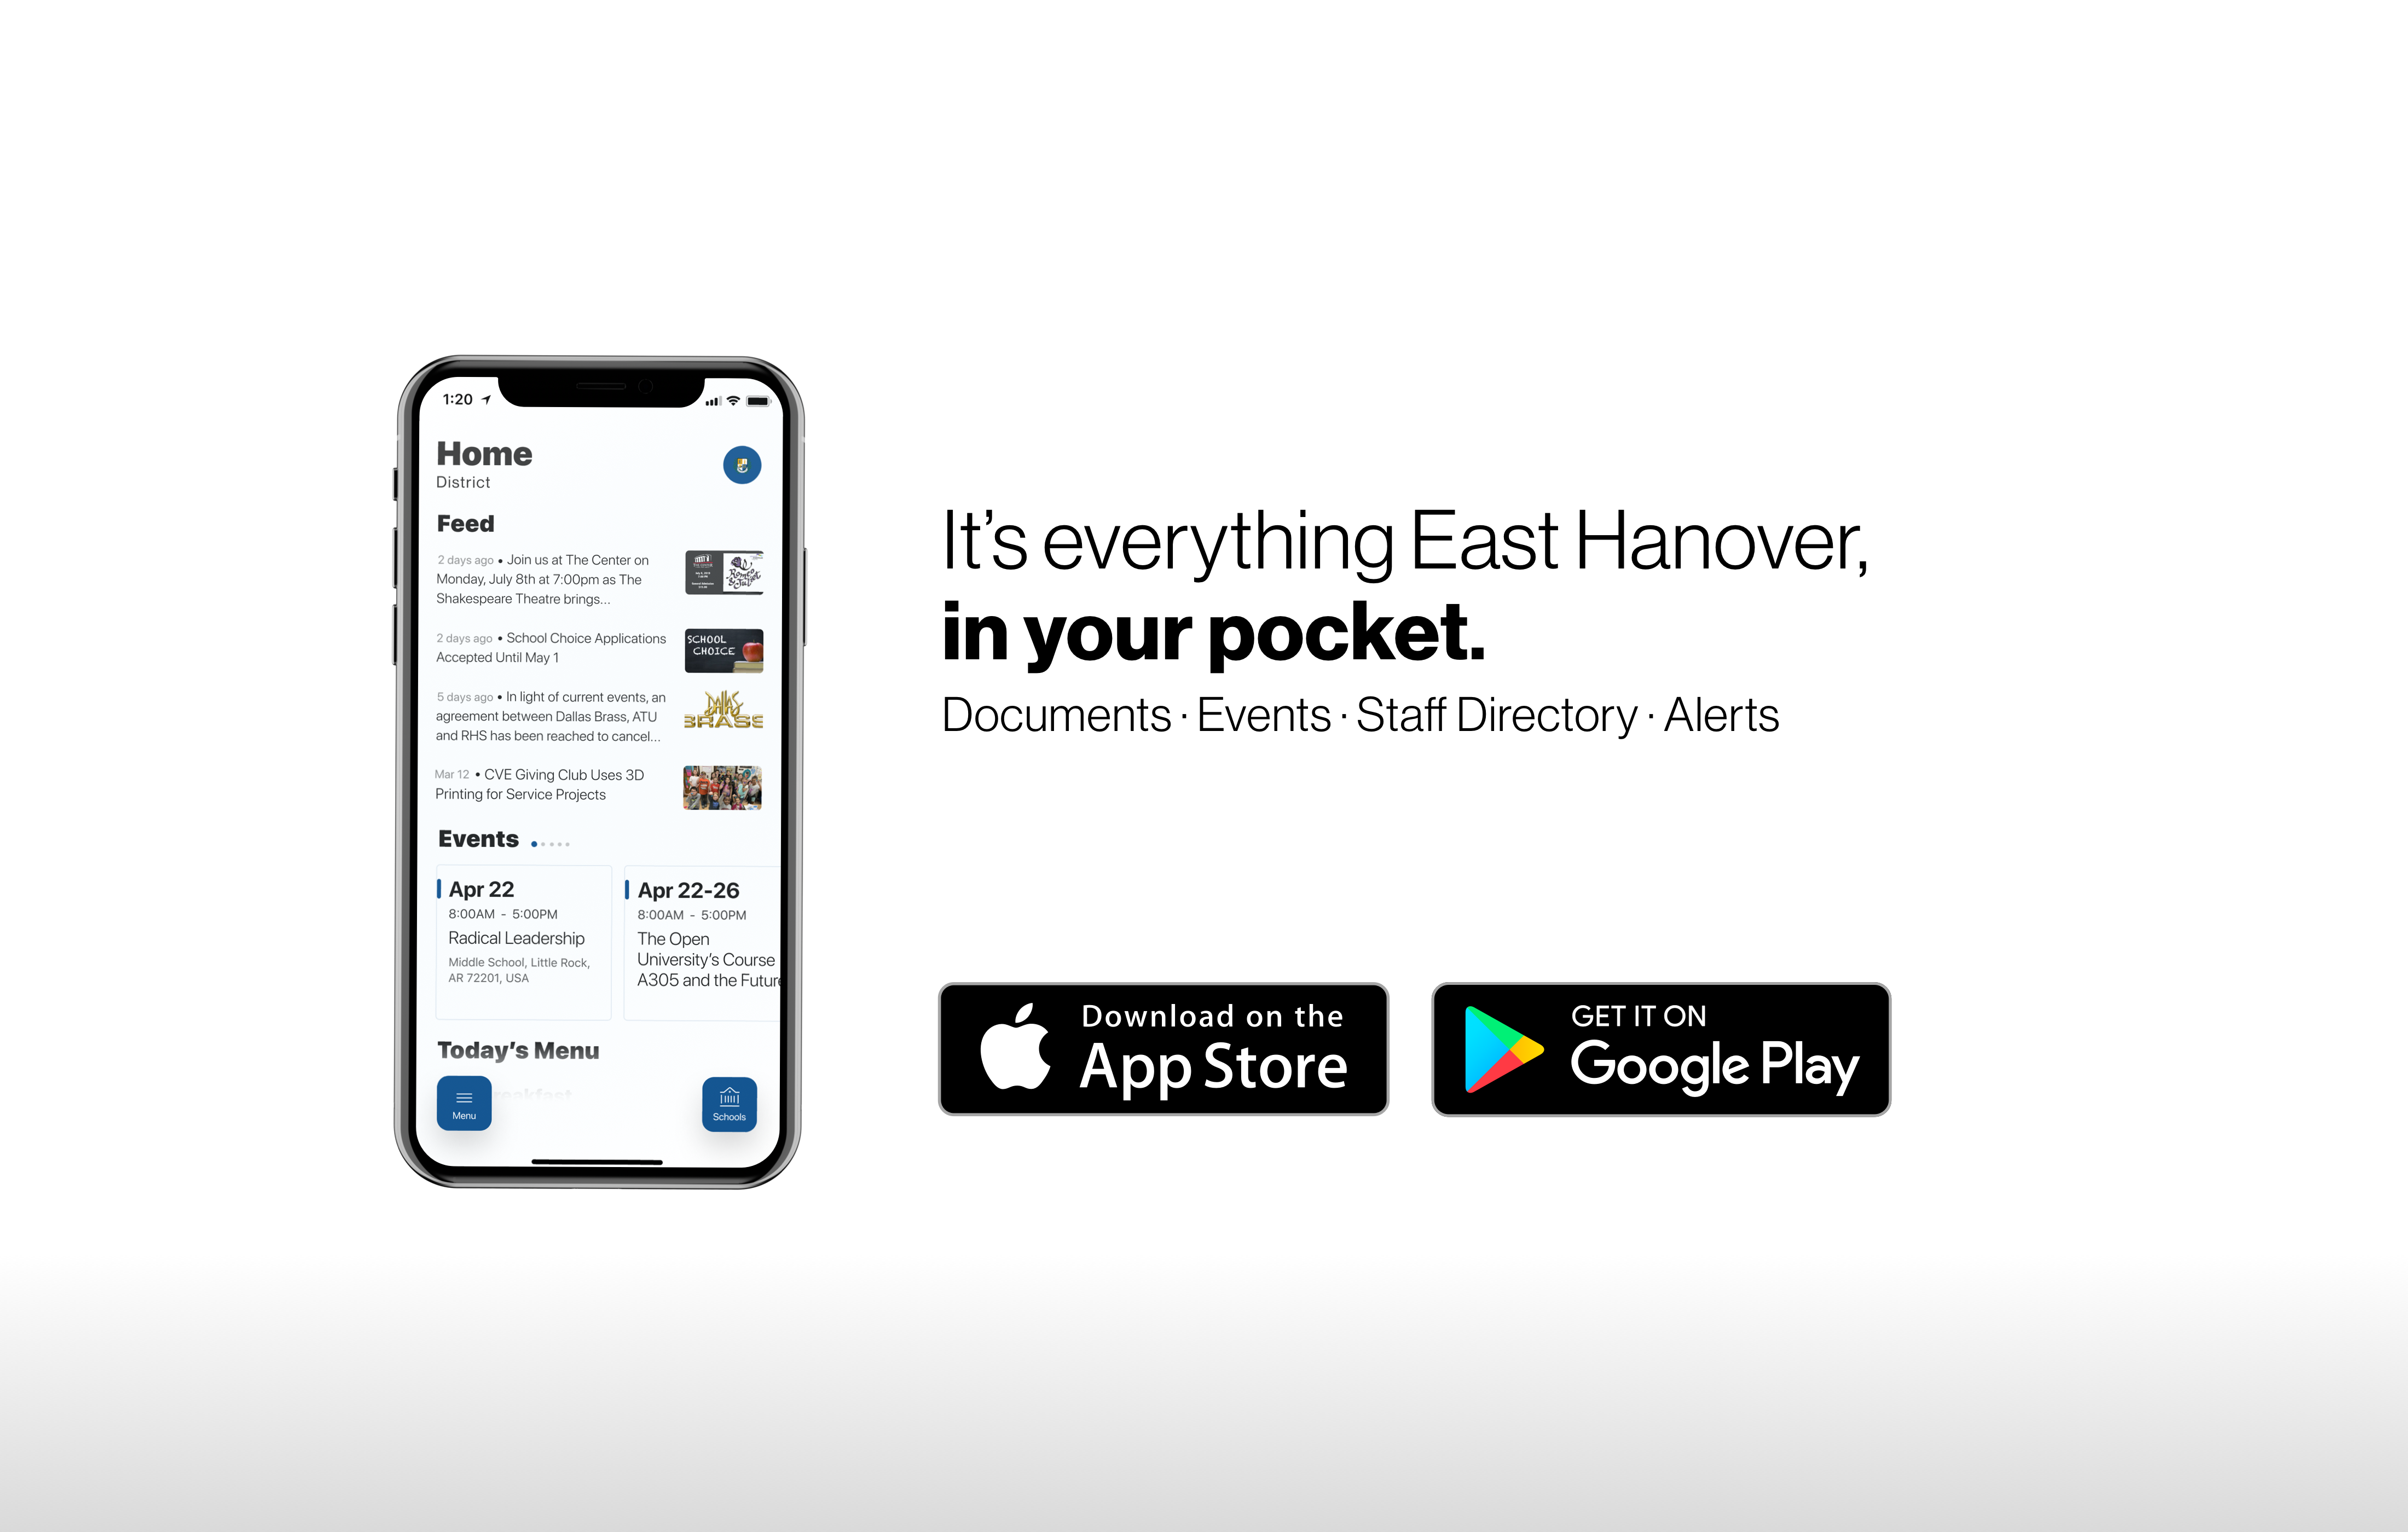 It's Everything East Hanover in your pocket